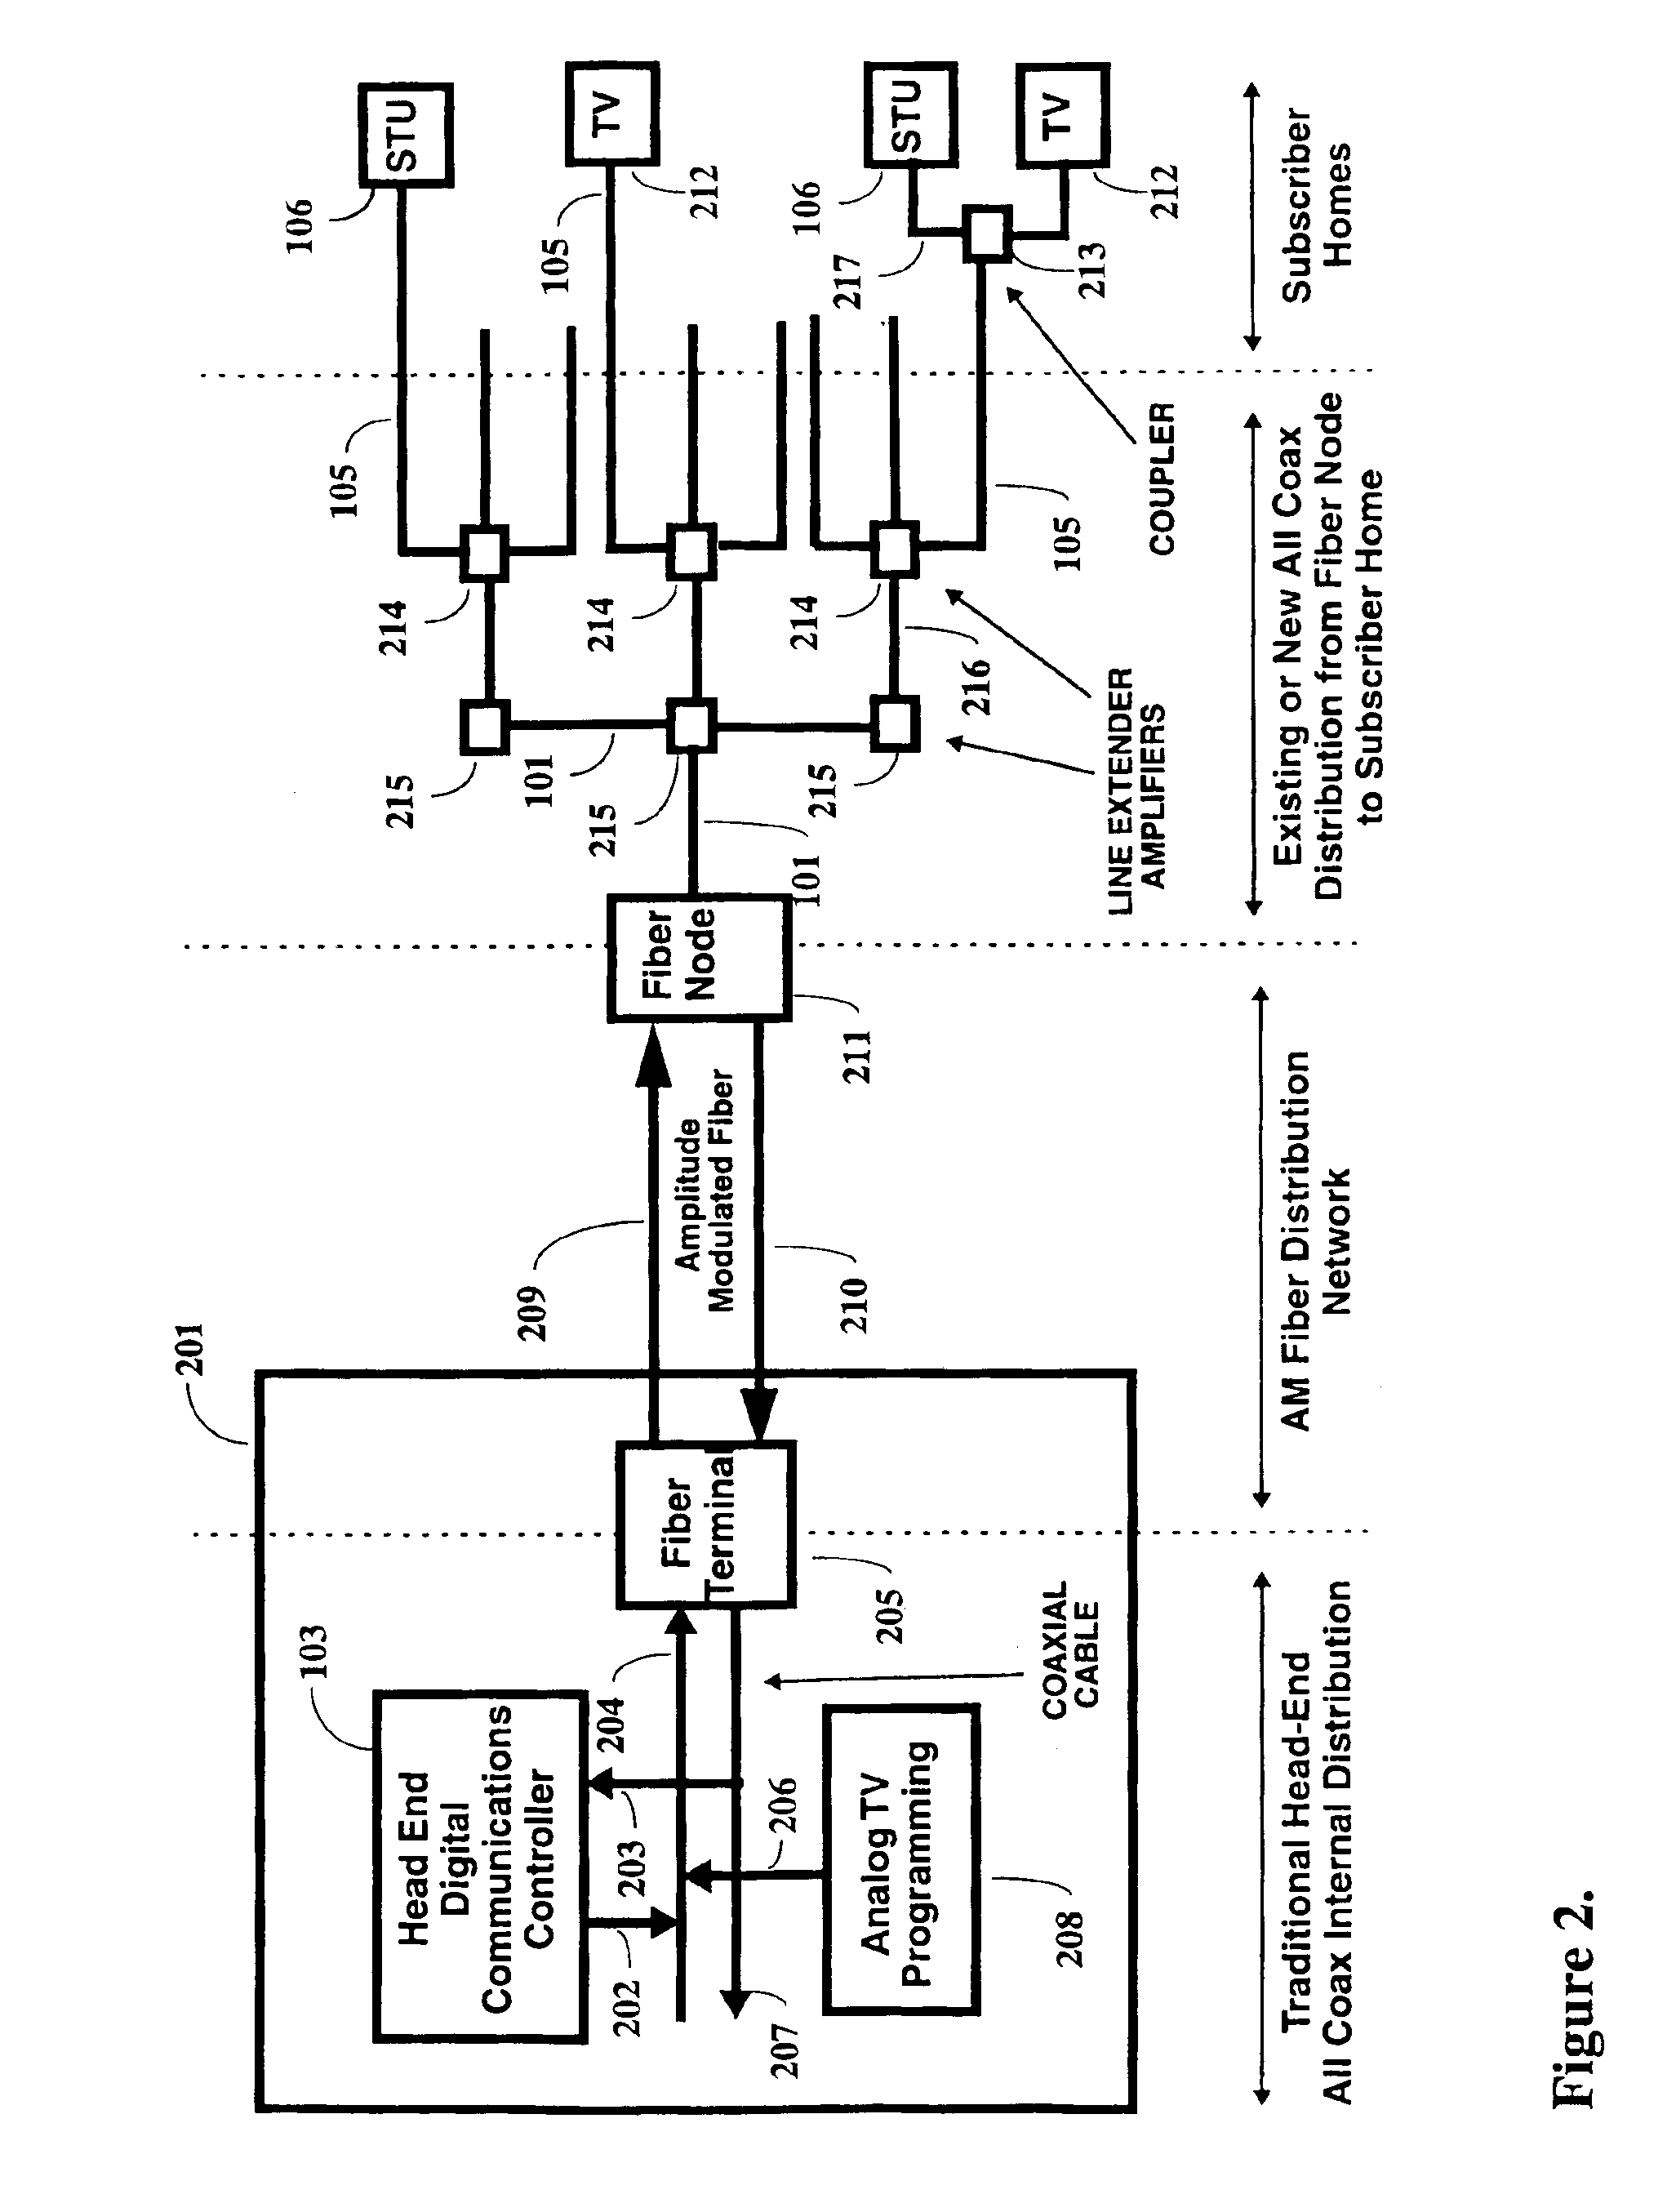 Multi-channel support for virtual private networks in a packet to ATM cell cable system